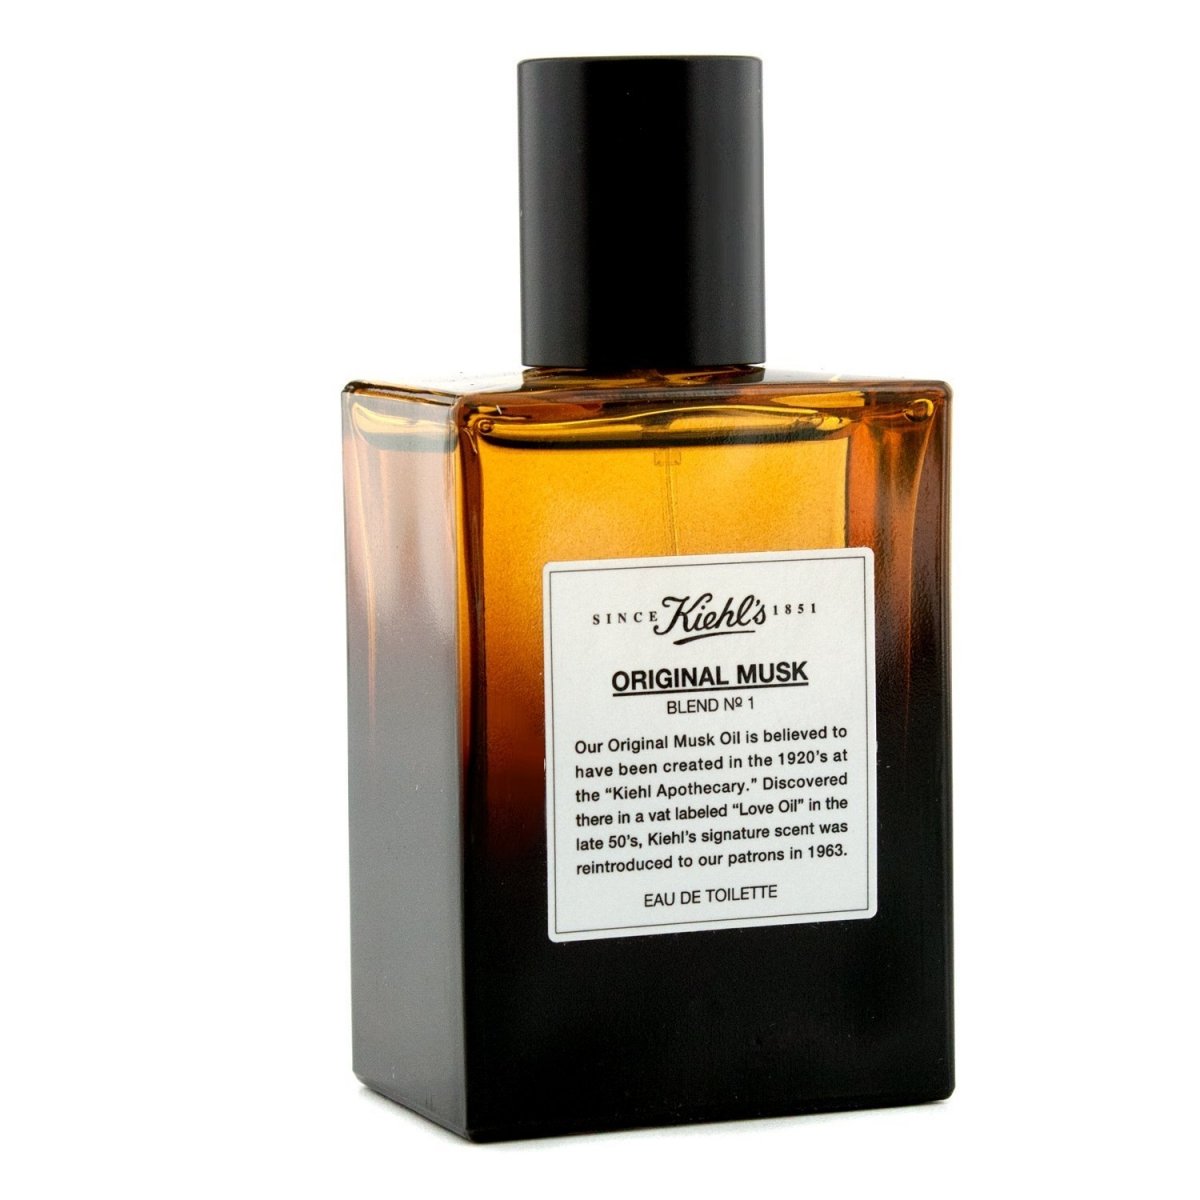 Original Musk Blend No. 1 by Kiehl's » Reviews & Perfume Facts